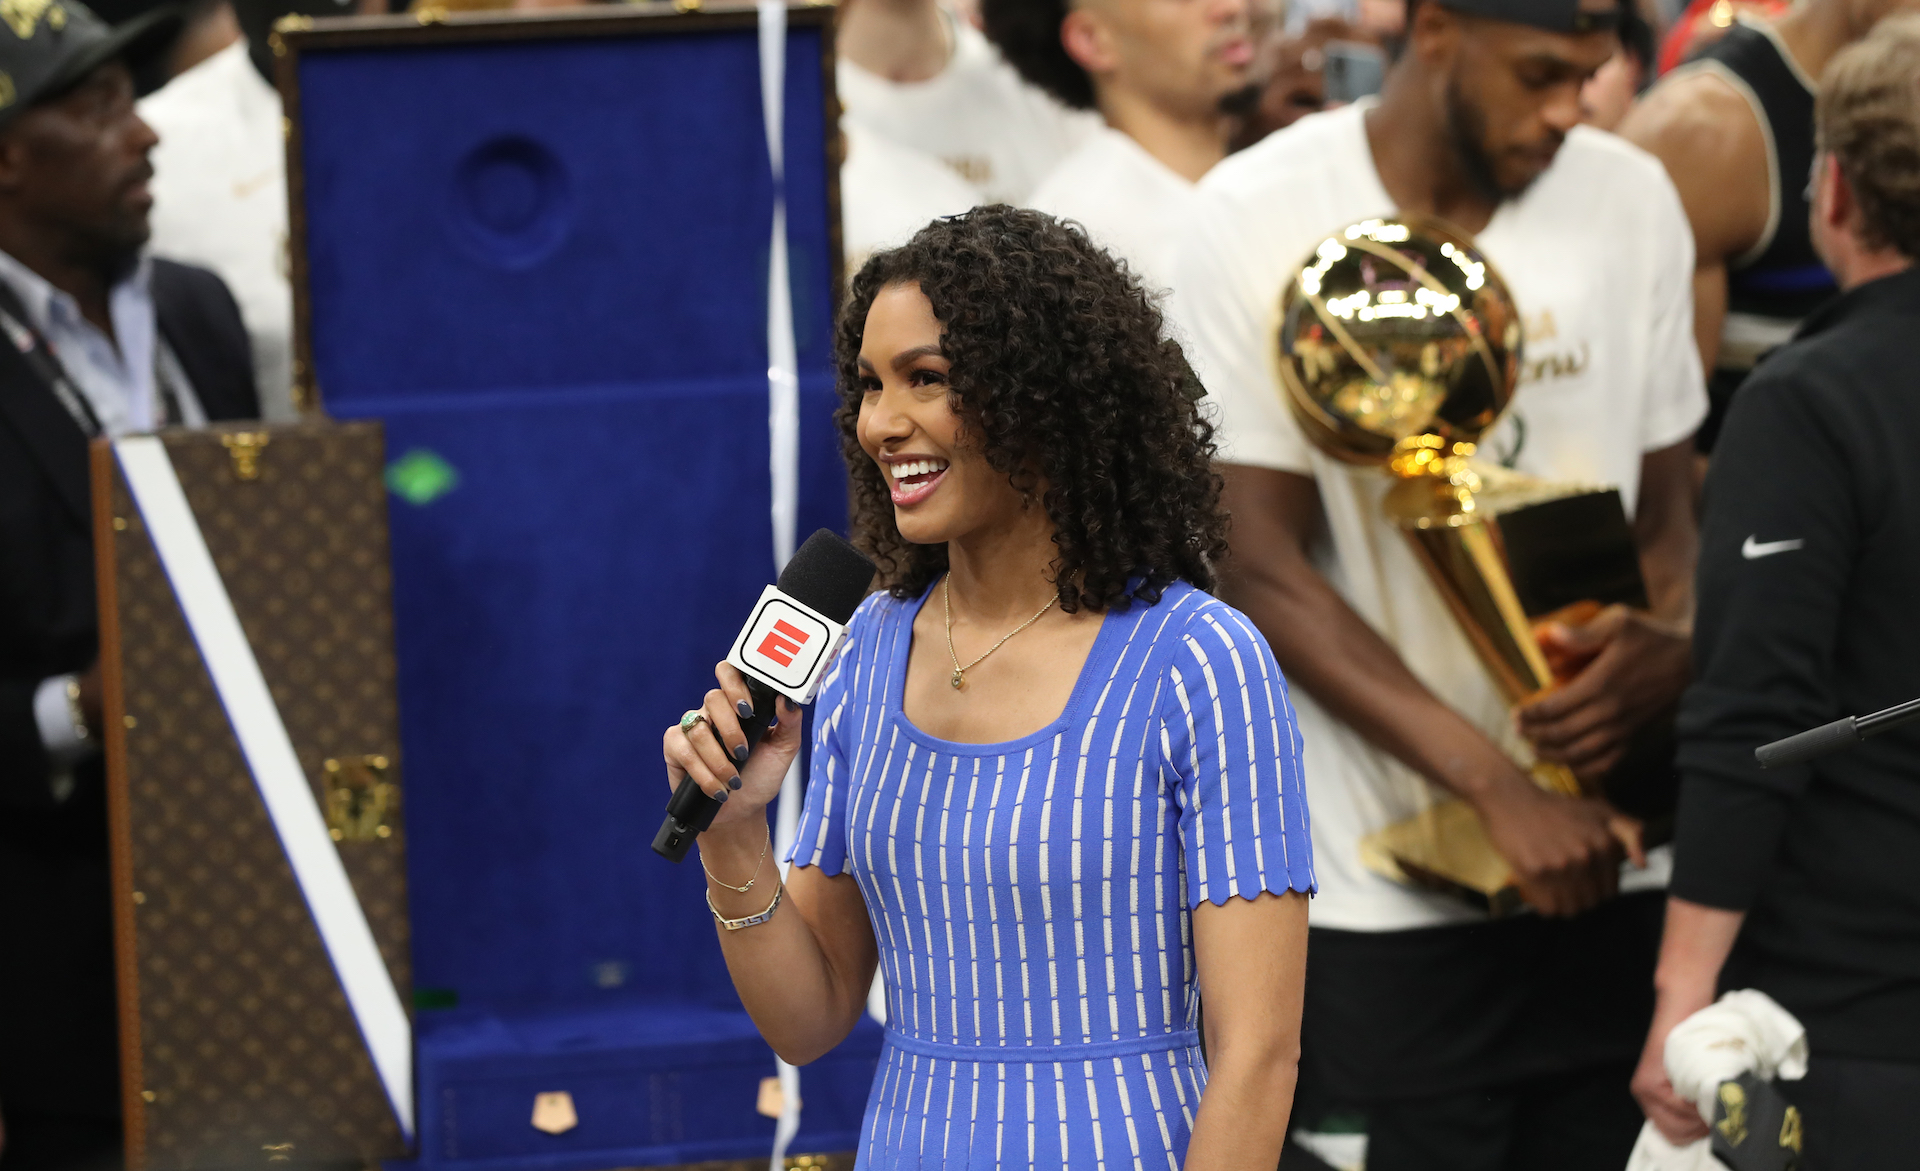 Malika Andrews will host ESPN's new 'NBA Today,' replacing Rachel Nichols  after controversy - The Boston Globe